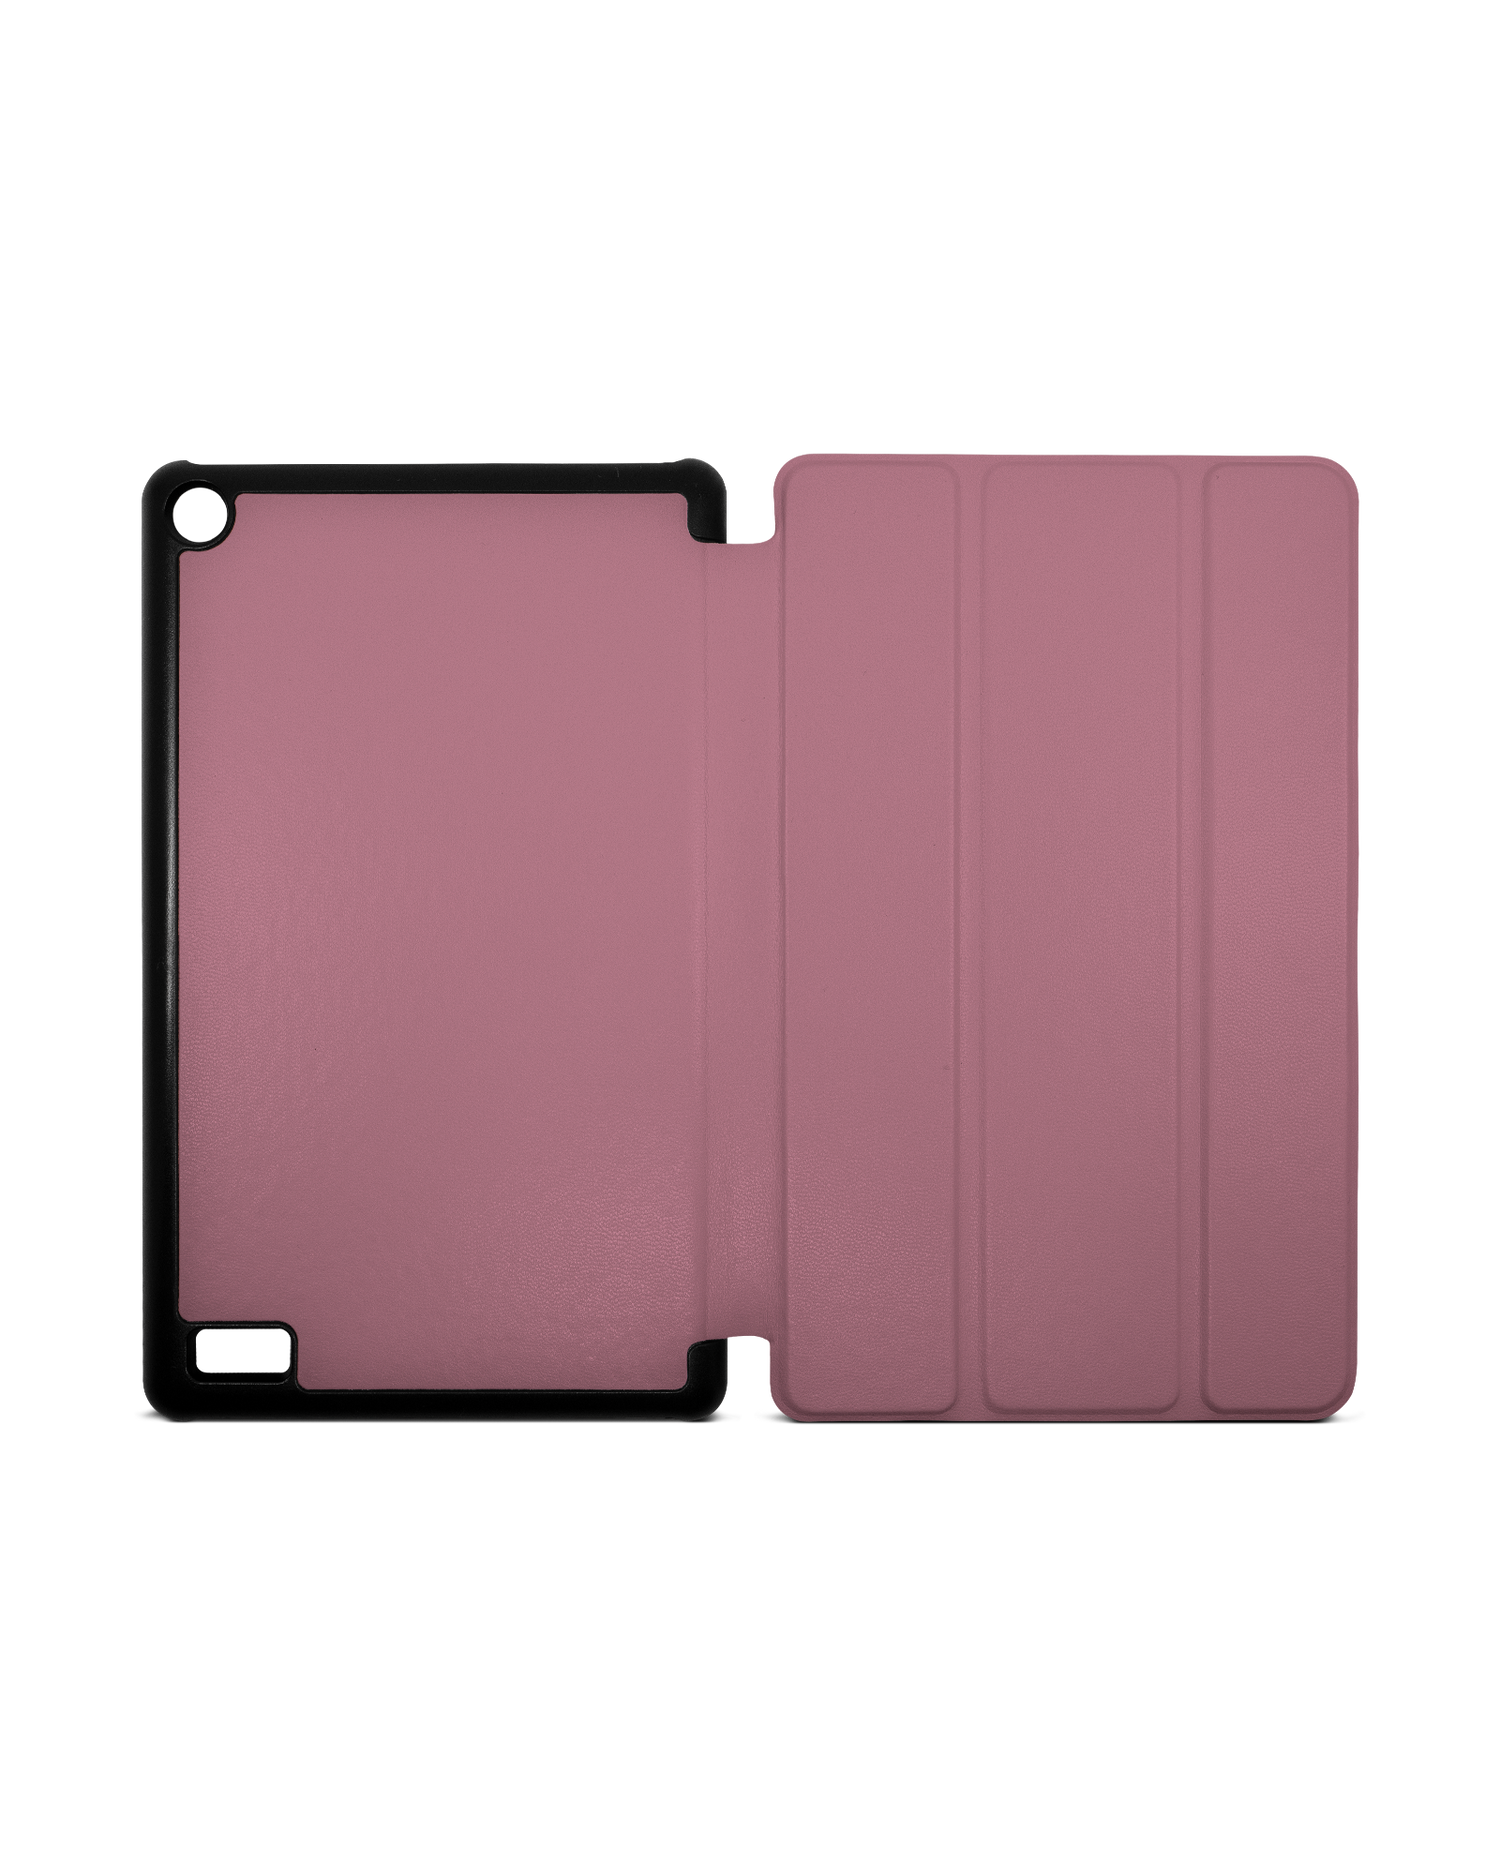 WILD ROSE Tablet Smart Case for Amazon Fire 7: Opened